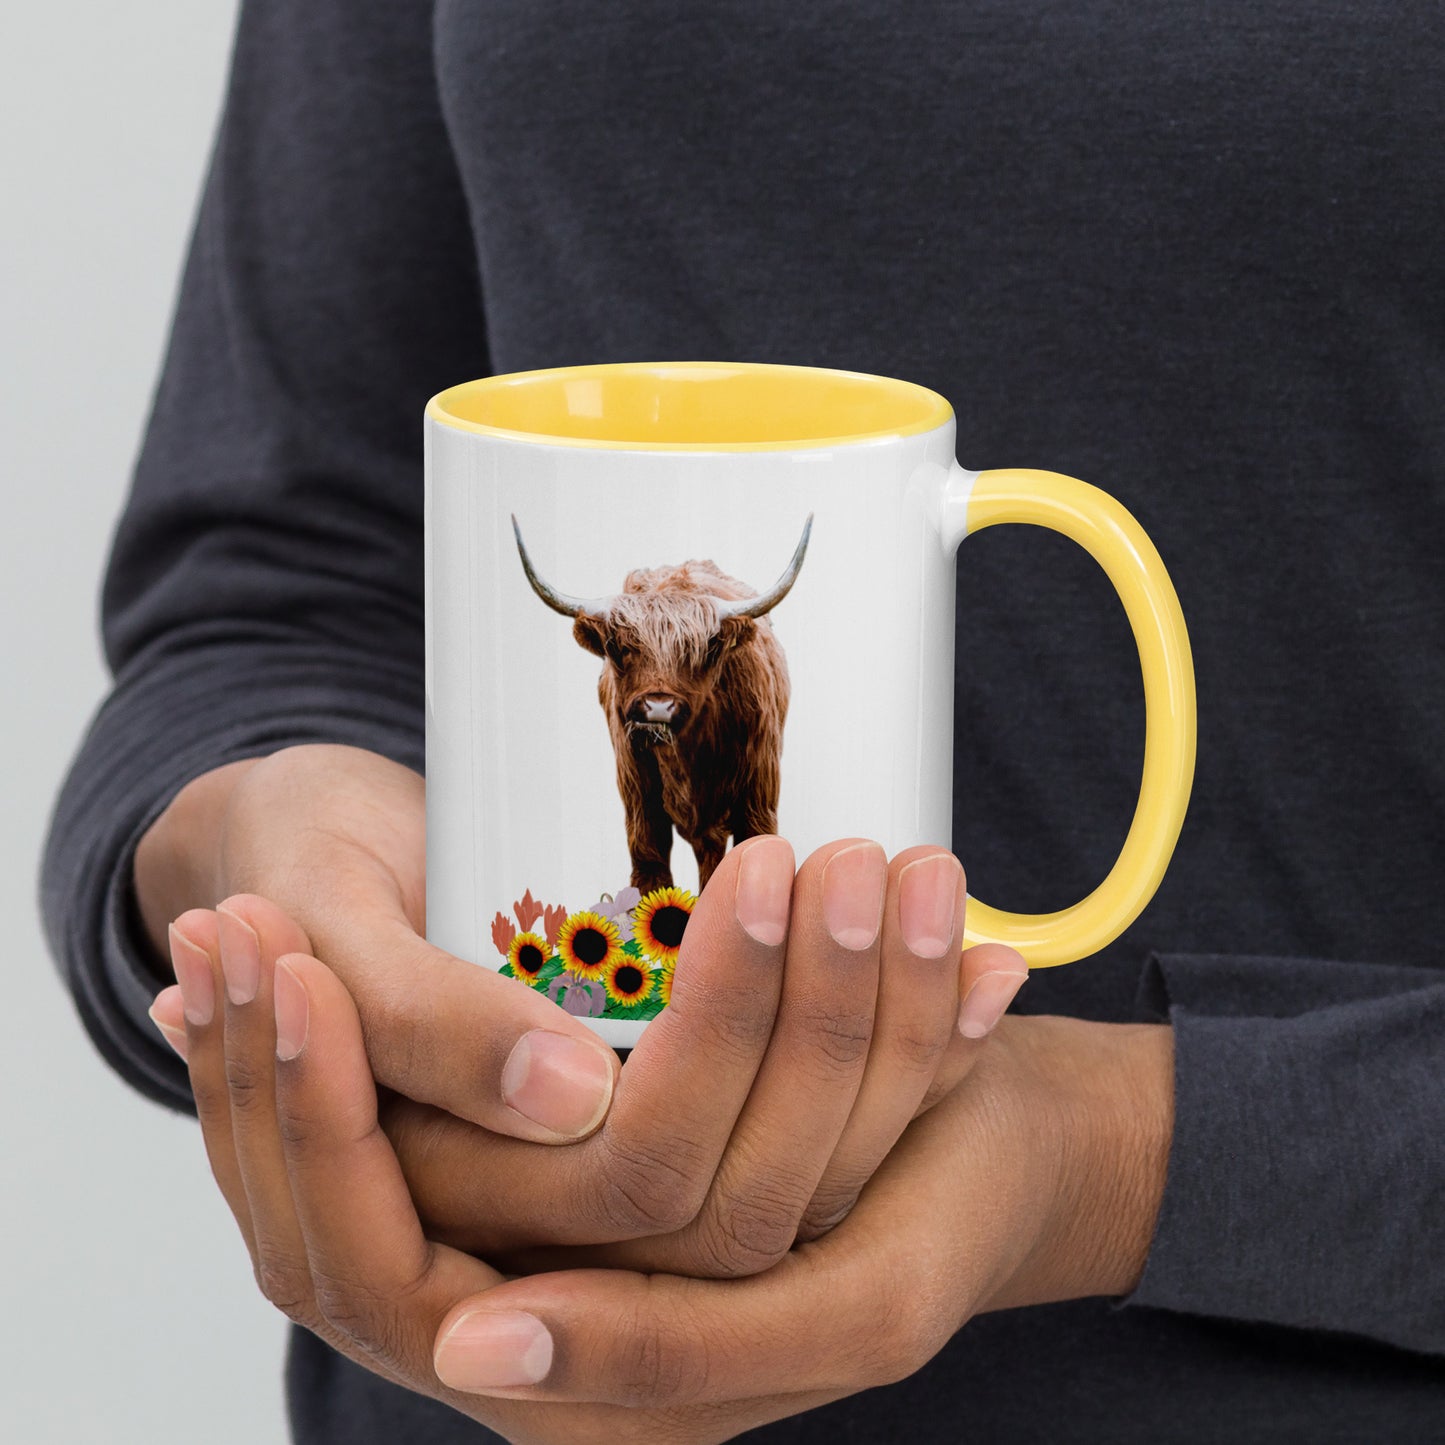 Colorful Delight: 11 Ounce Highland Cow in Sunflower Field Ceramic Mug with Vibrant Rim and Handle | 11 Oz. Mug with Color Inside